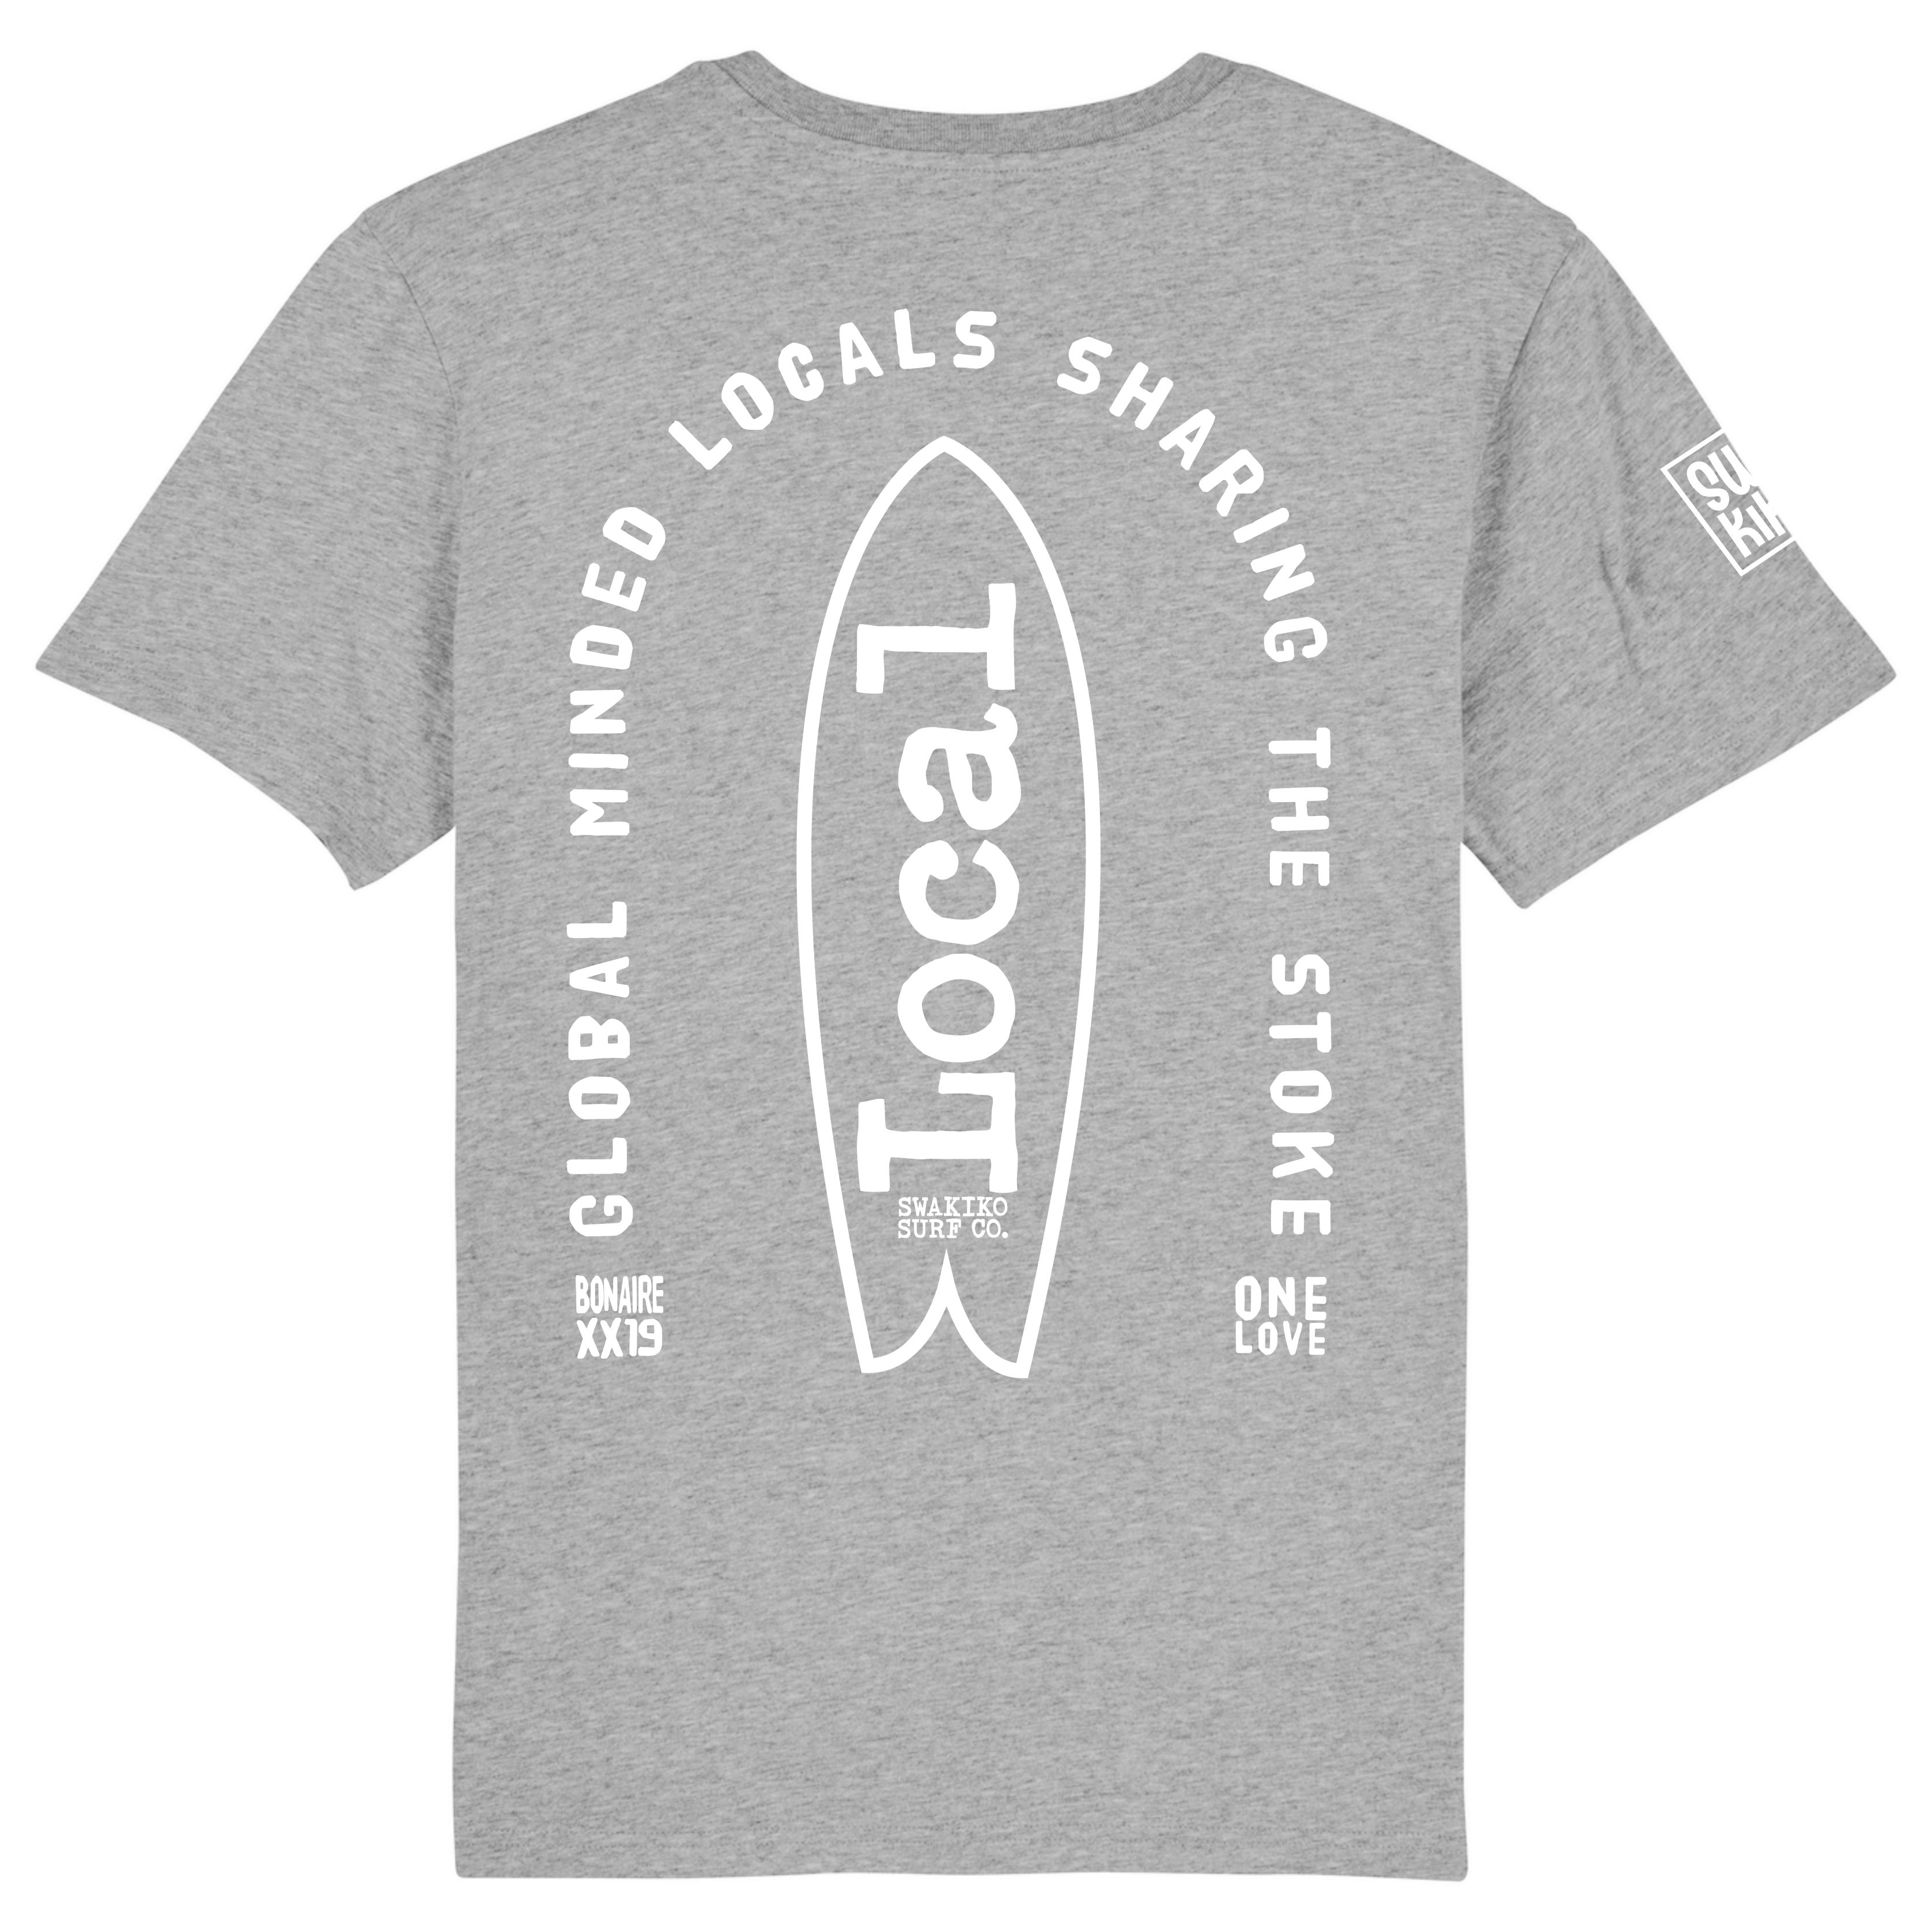 Stoked Locals T-shirt, grey